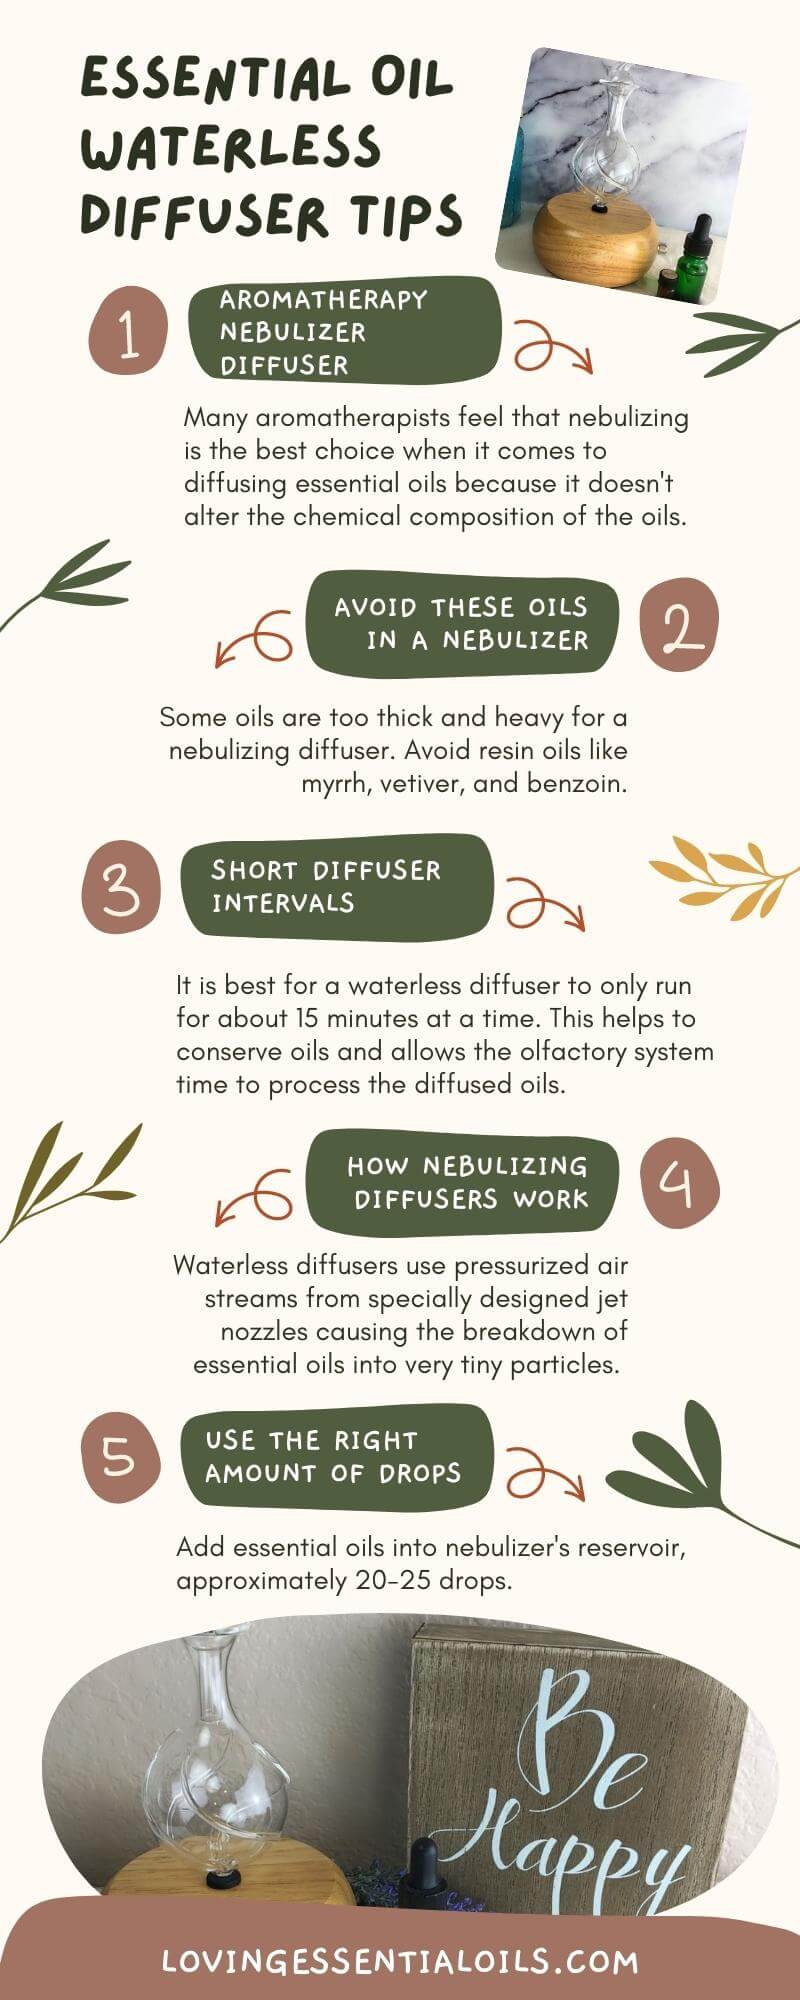 Essential Oil Waterless Diffuser Tips by Loving Essential Oils